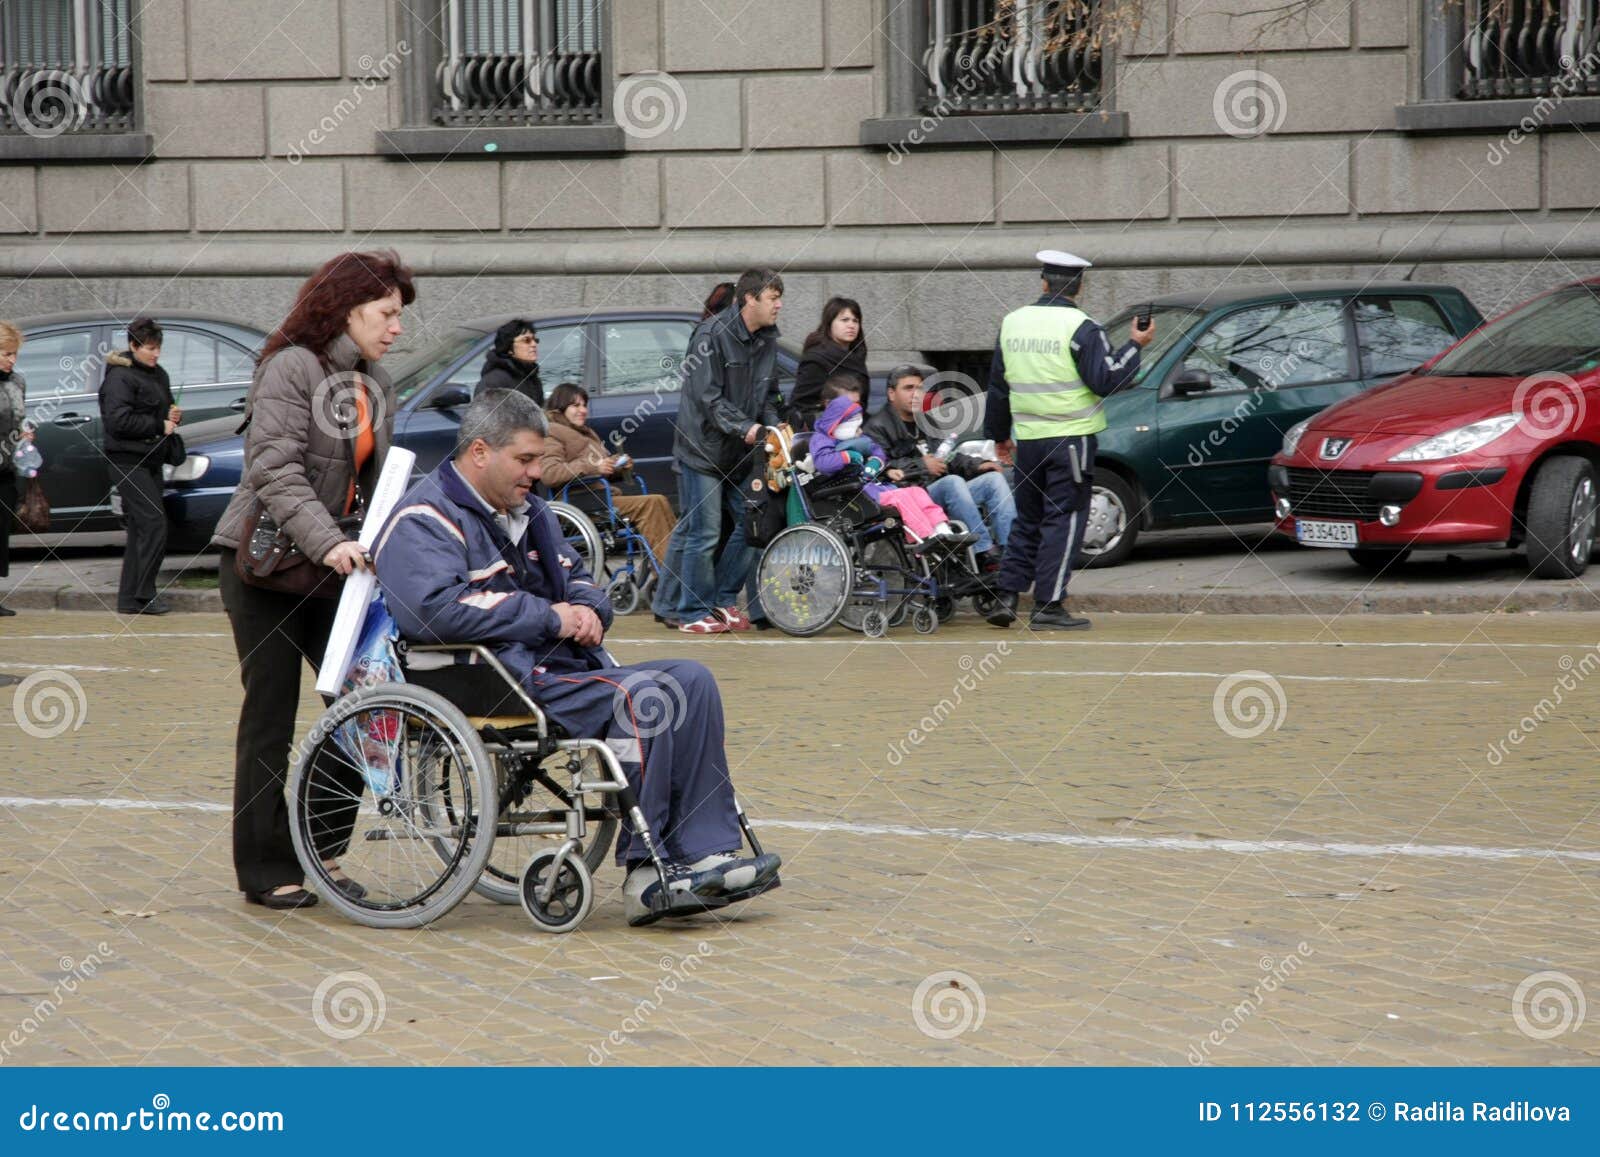 Injured Man In A Wheelchair Side View Stock Photography | CartoonDealer ...